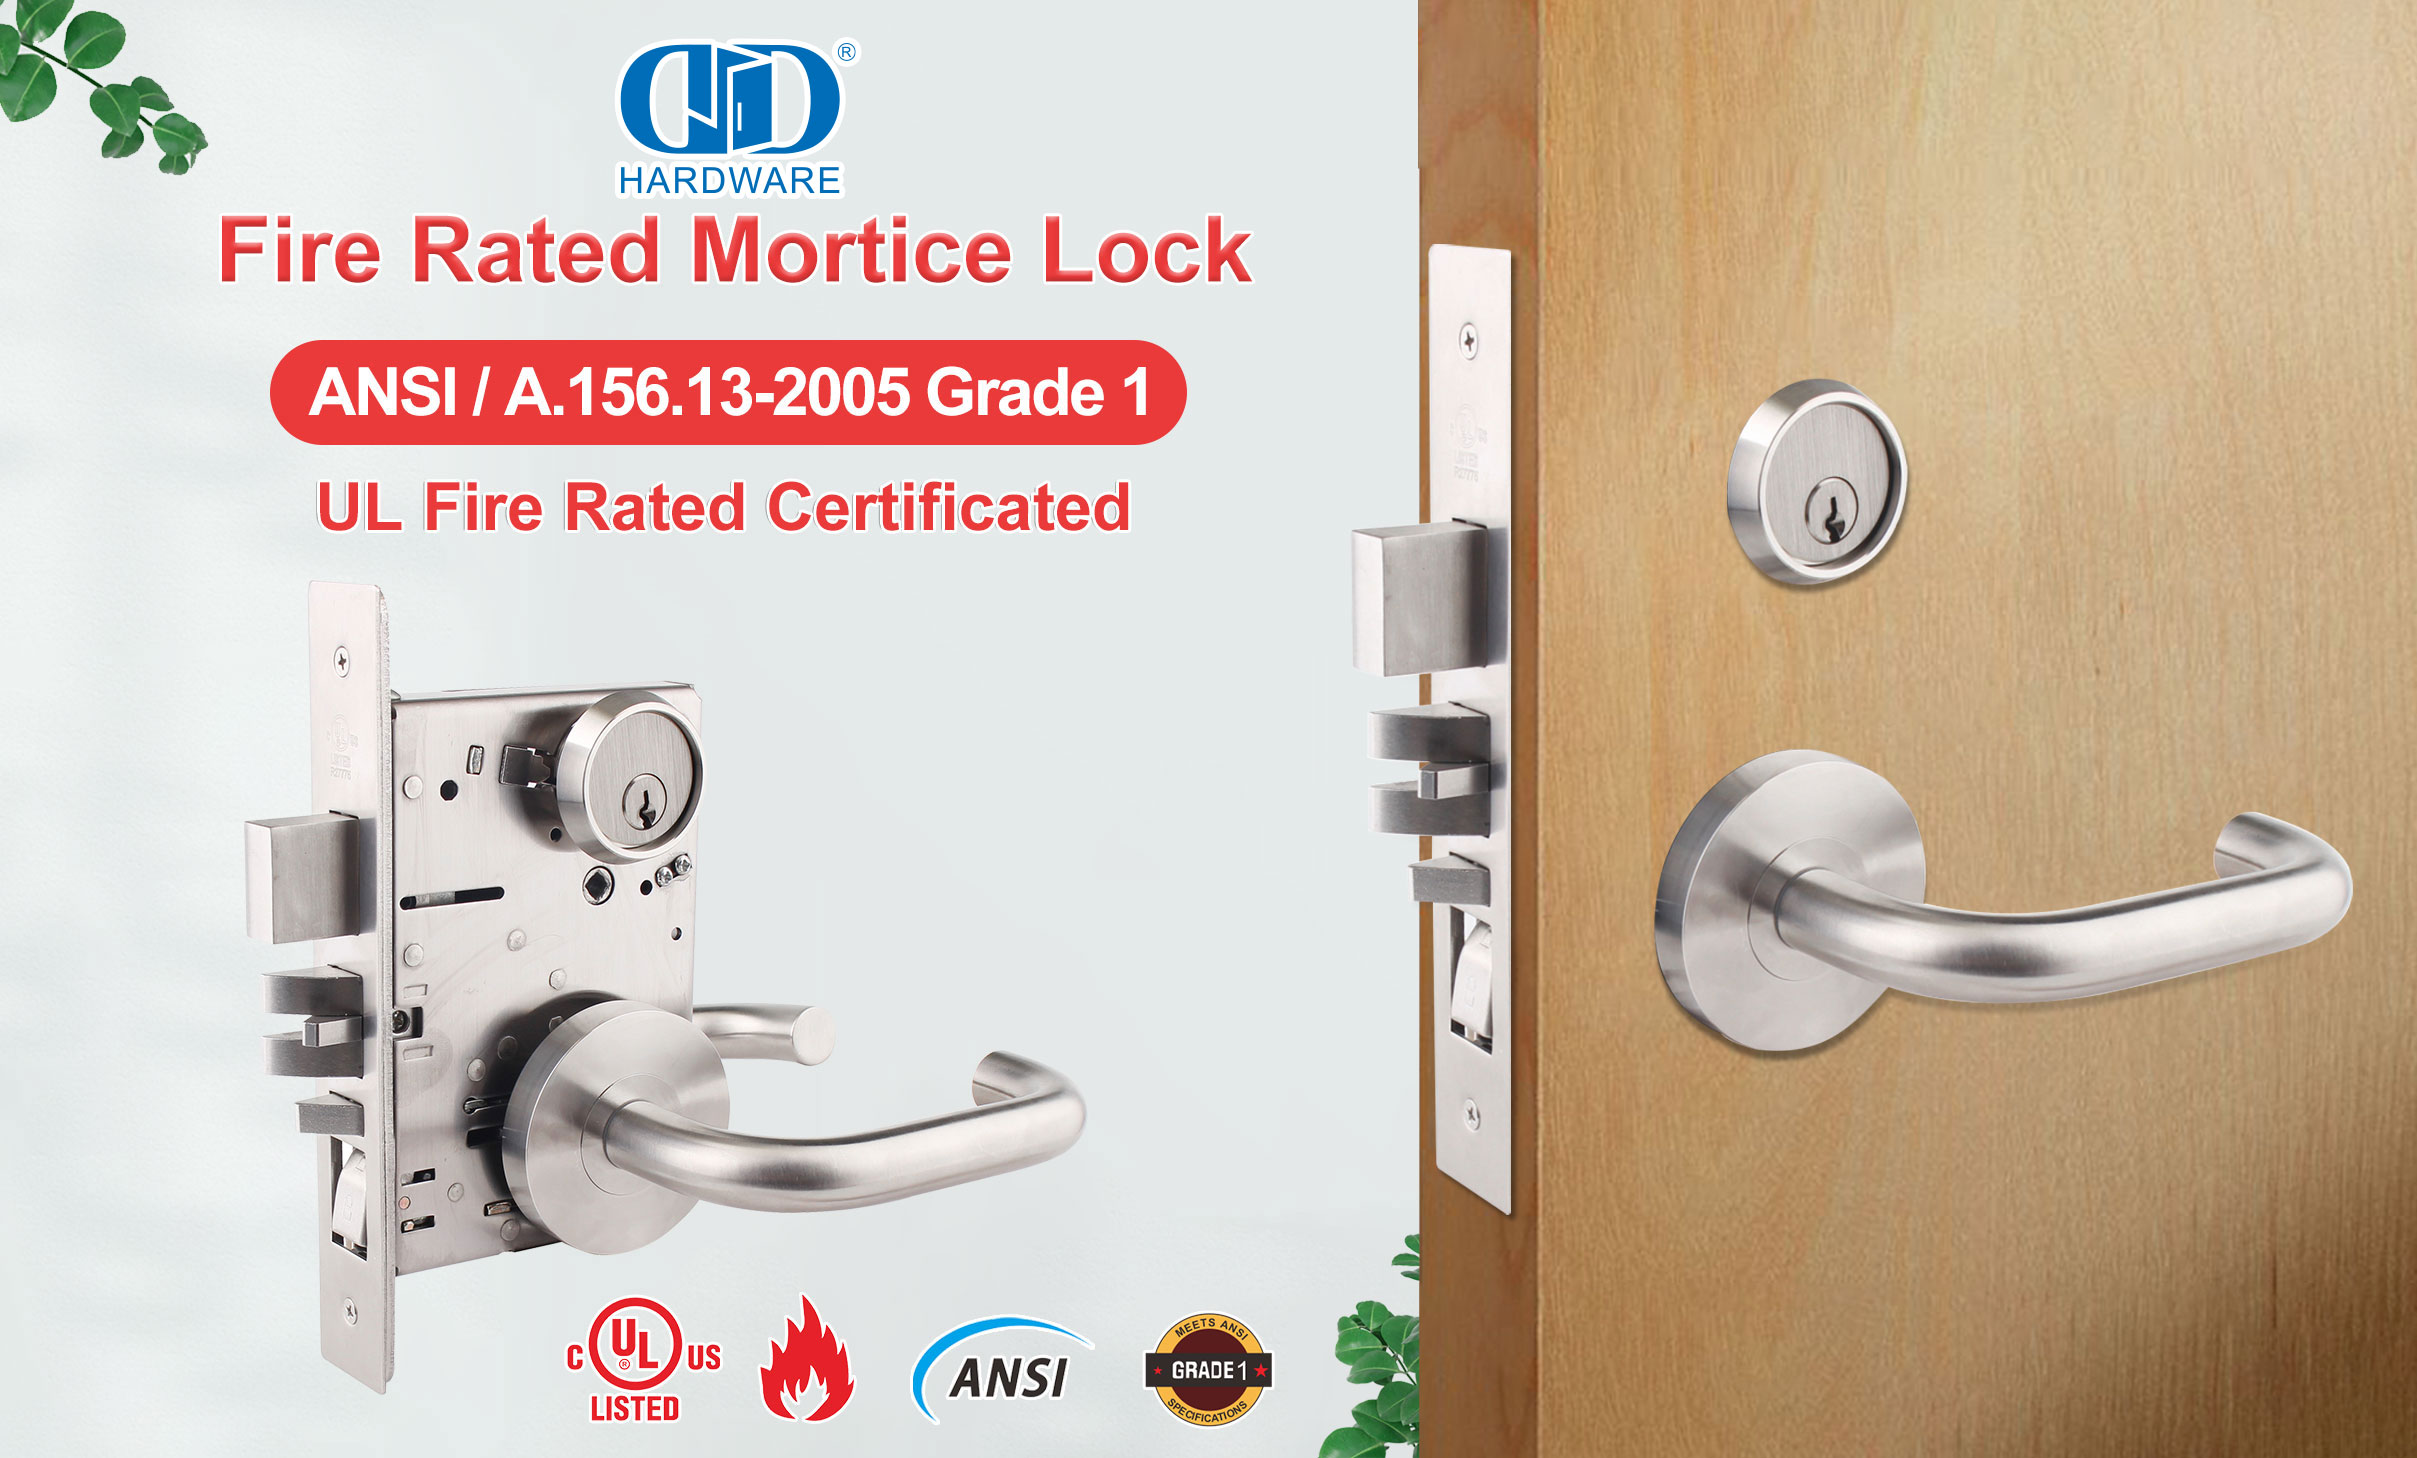 Grade1 Mortice Lock, compliant with ANSI standards